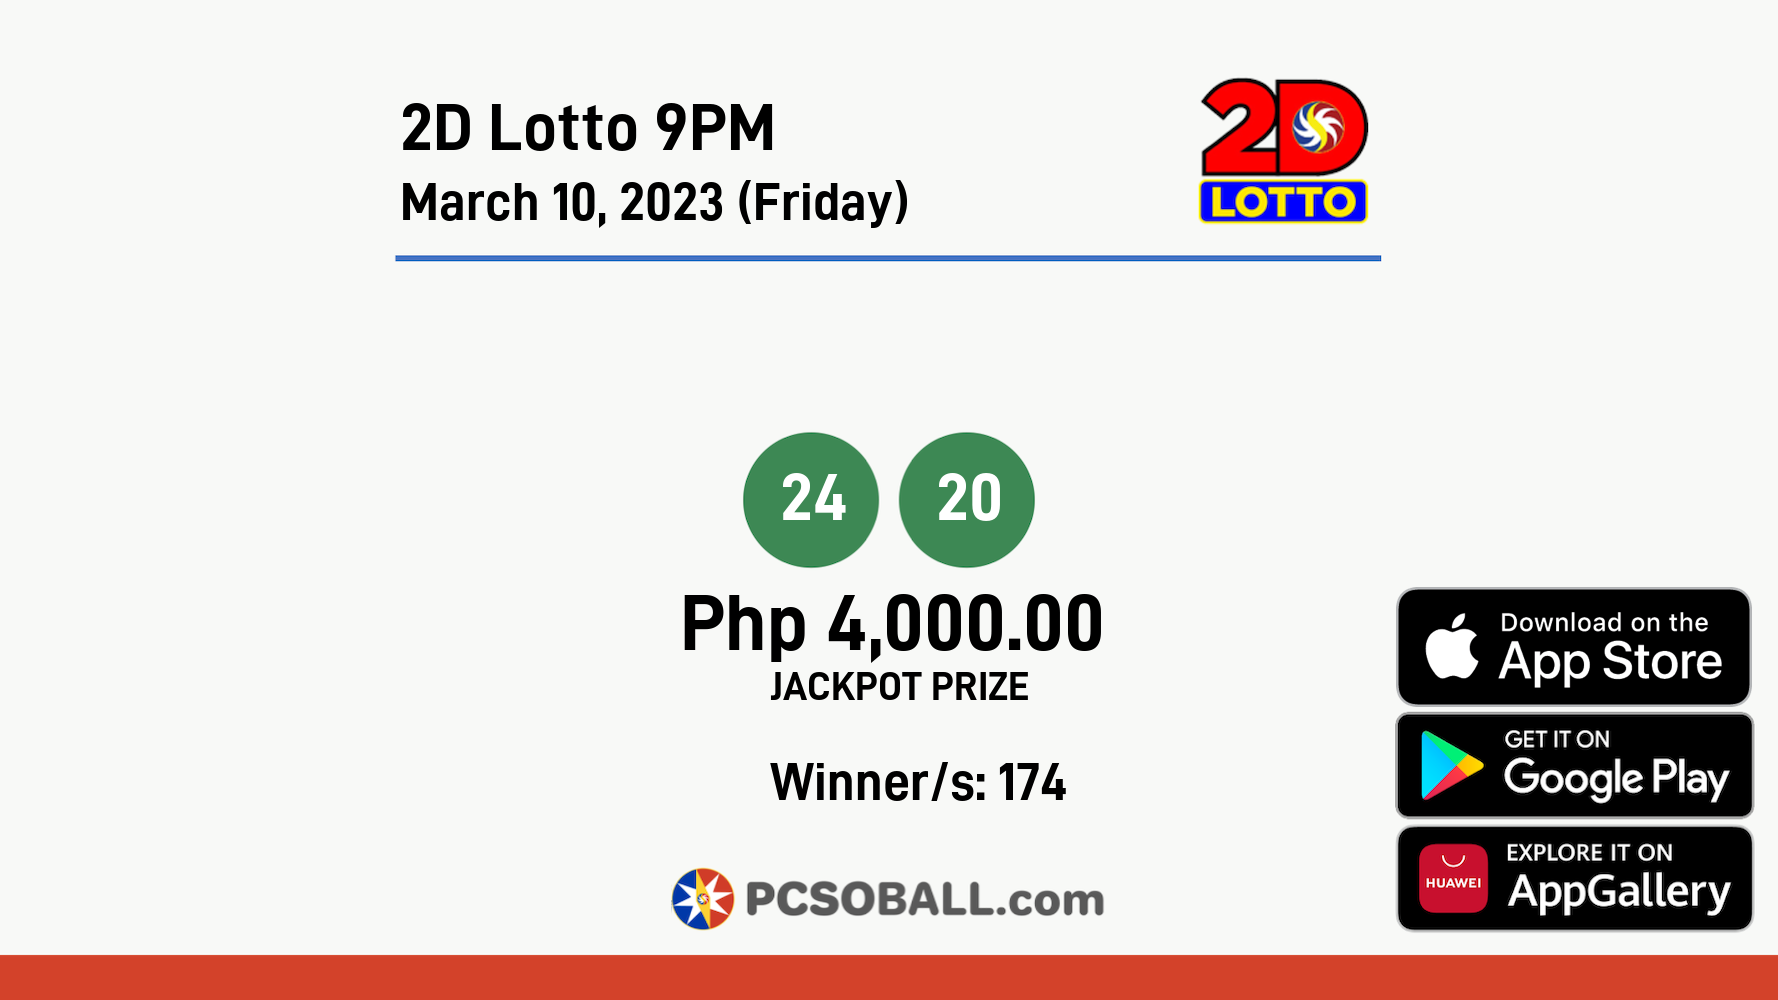 2D Lotto 9PM March 10, 2023 (Friday) Result